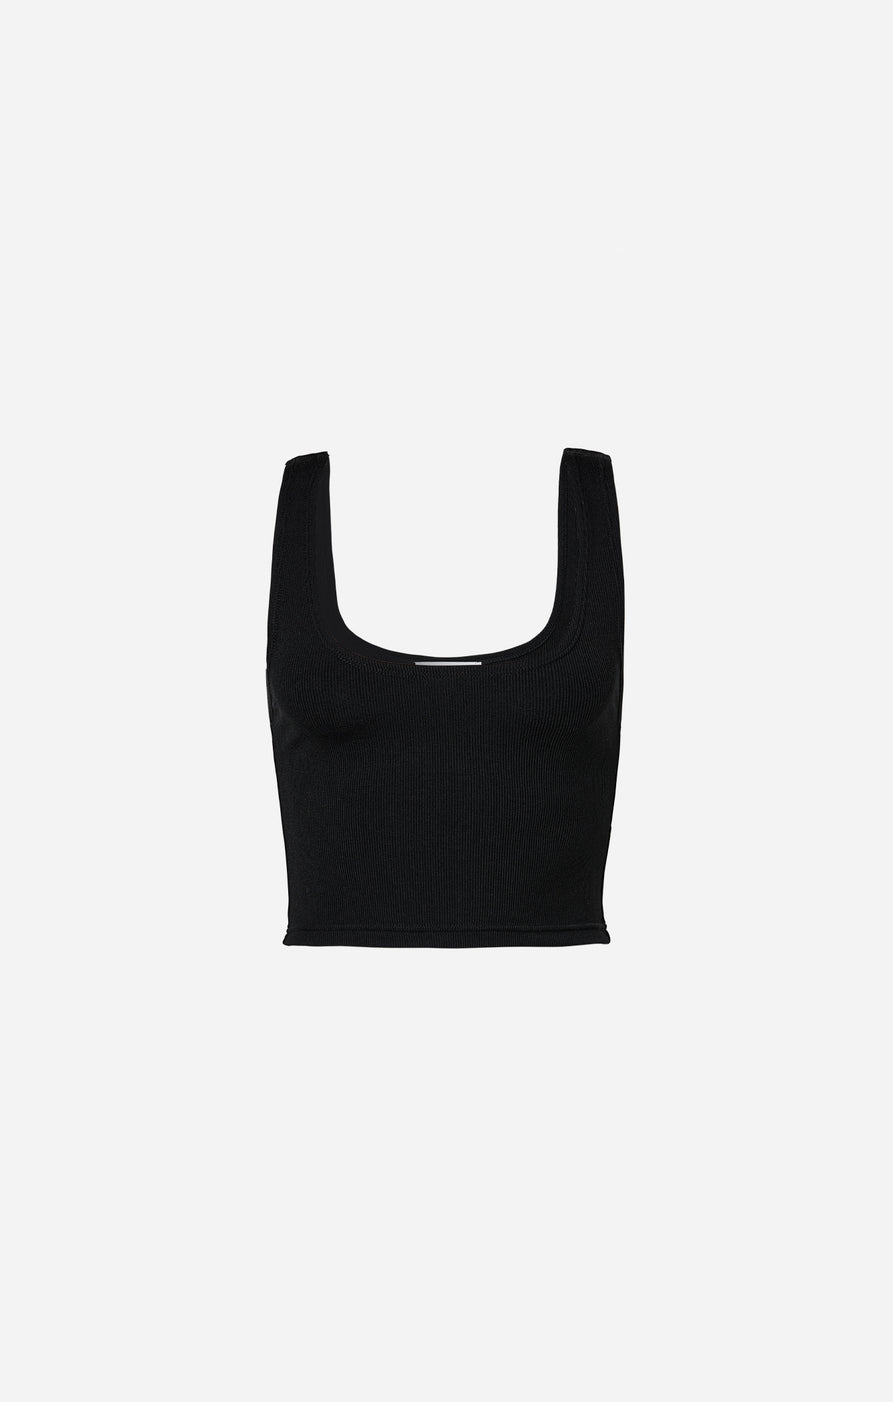 THE LUXE RIB CROP - BLACK – All Things Golden